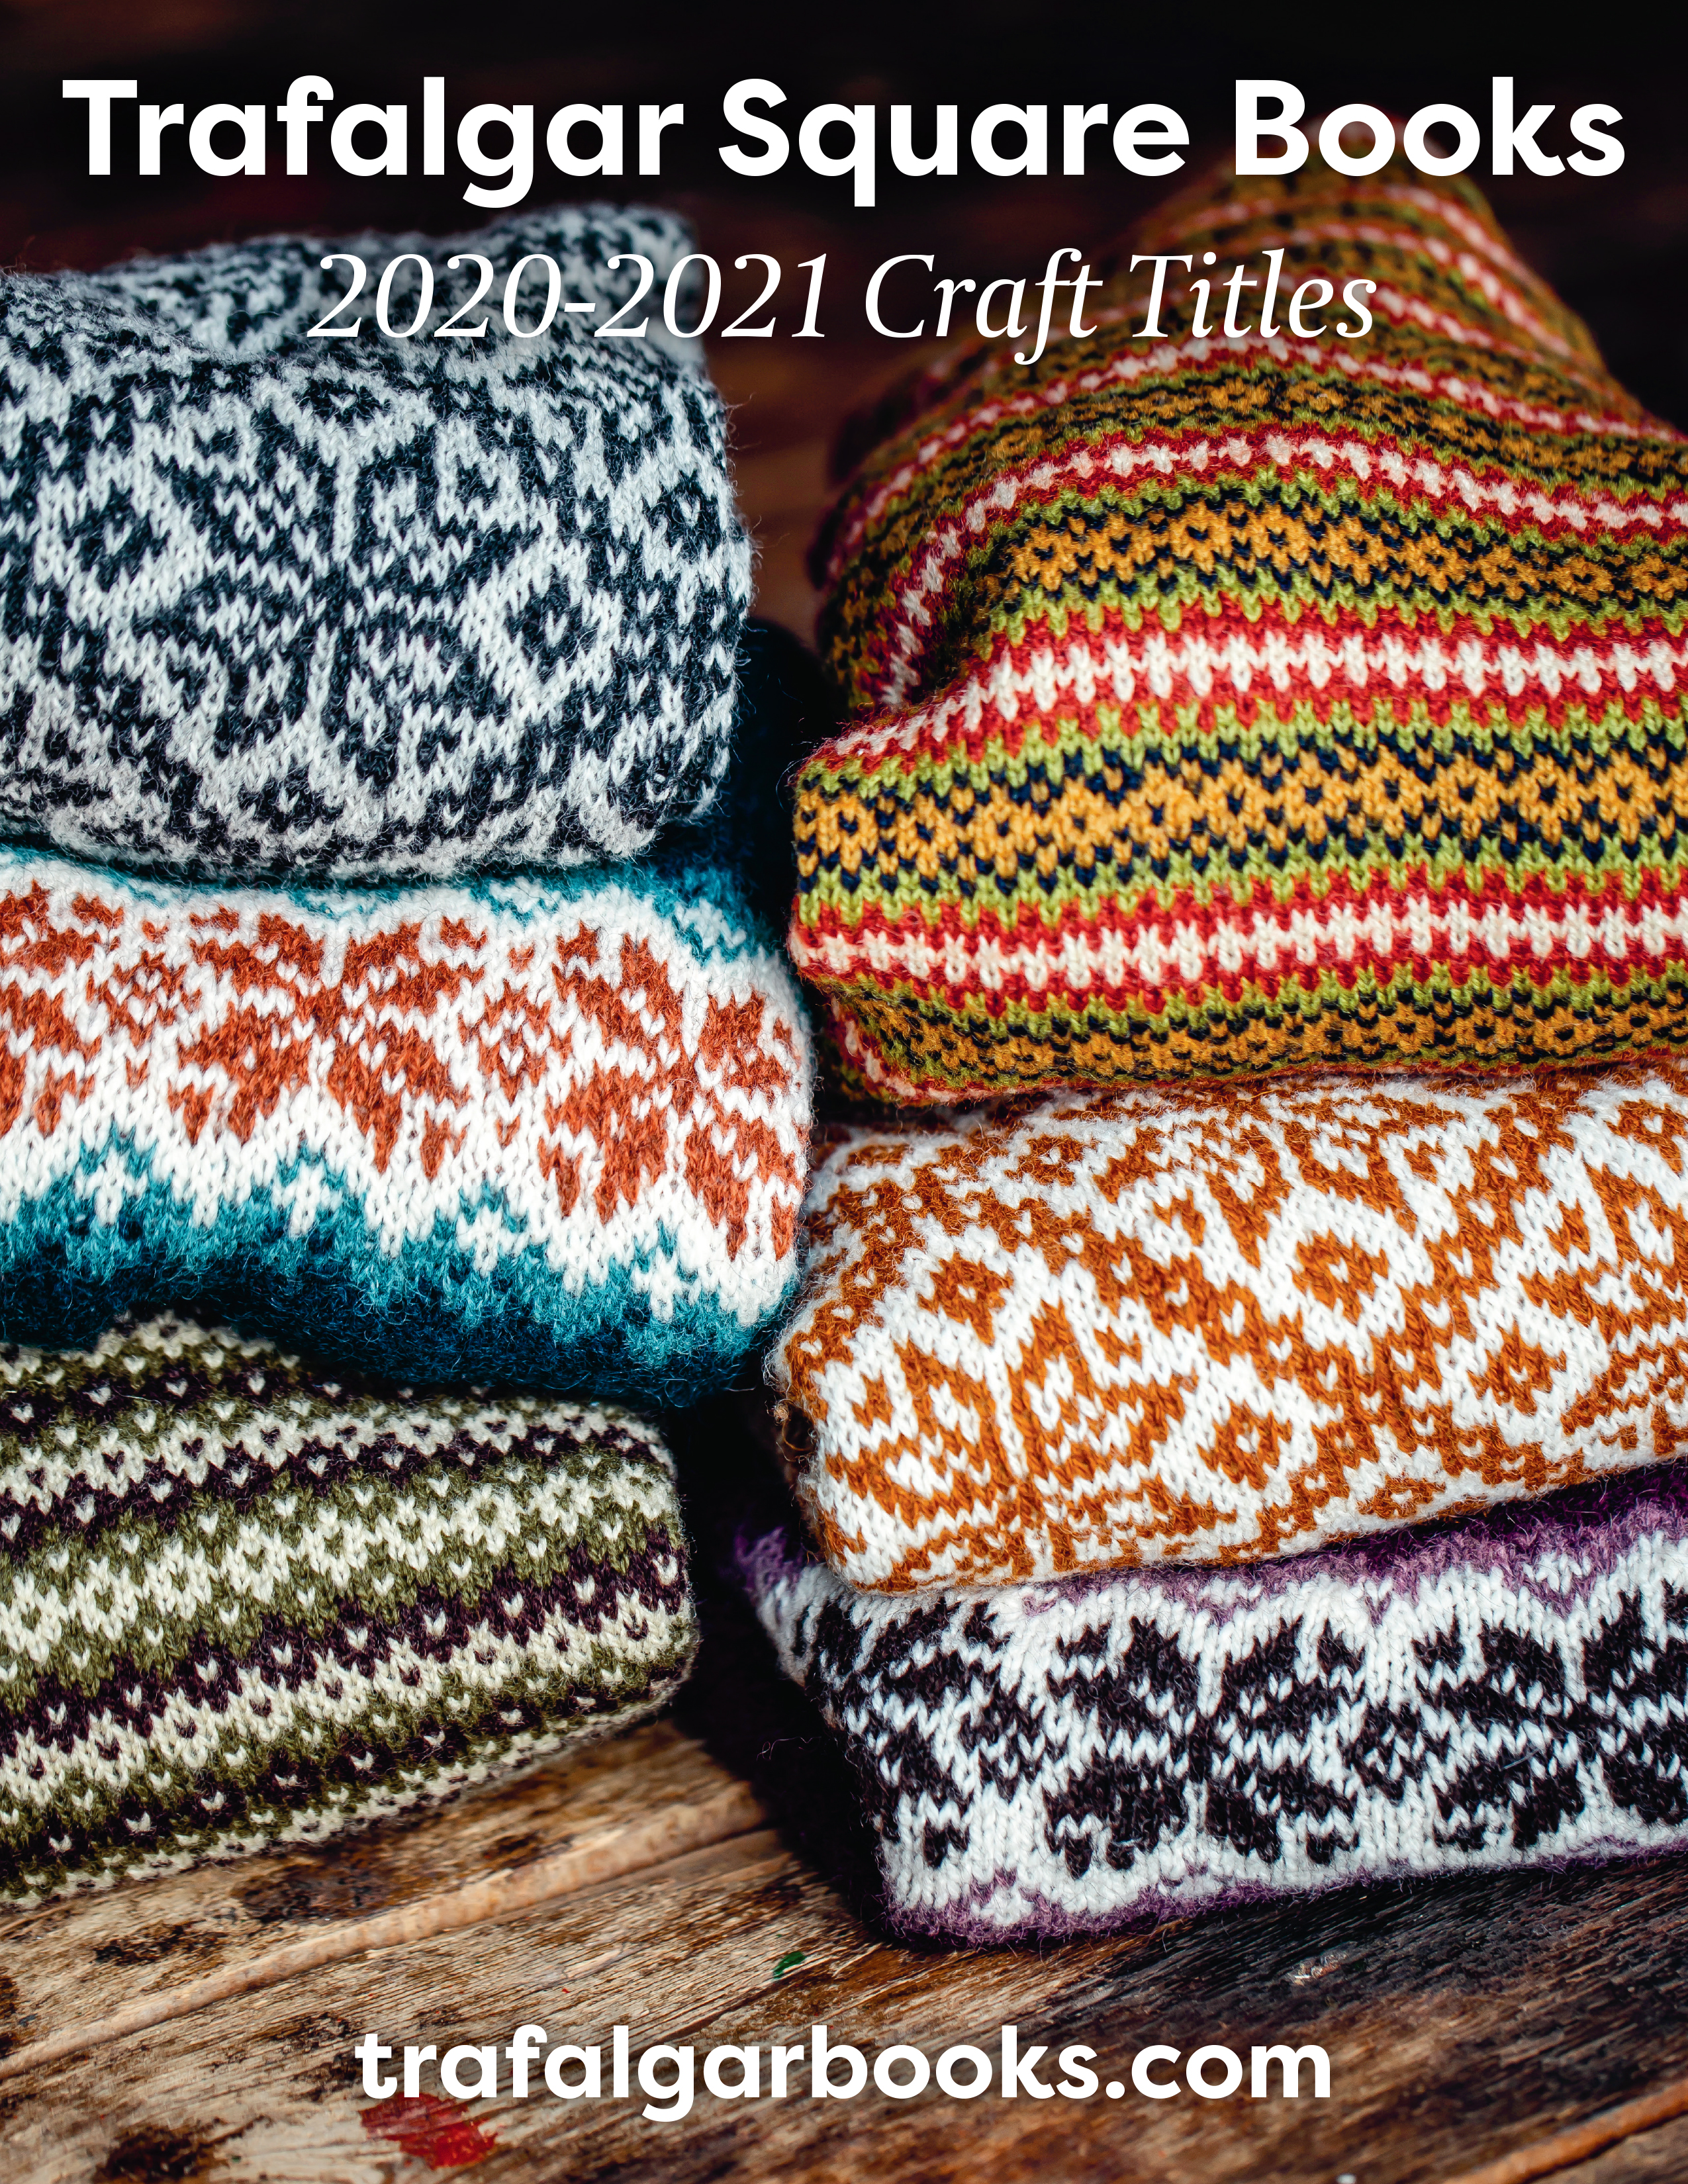 stack of knit sweaters